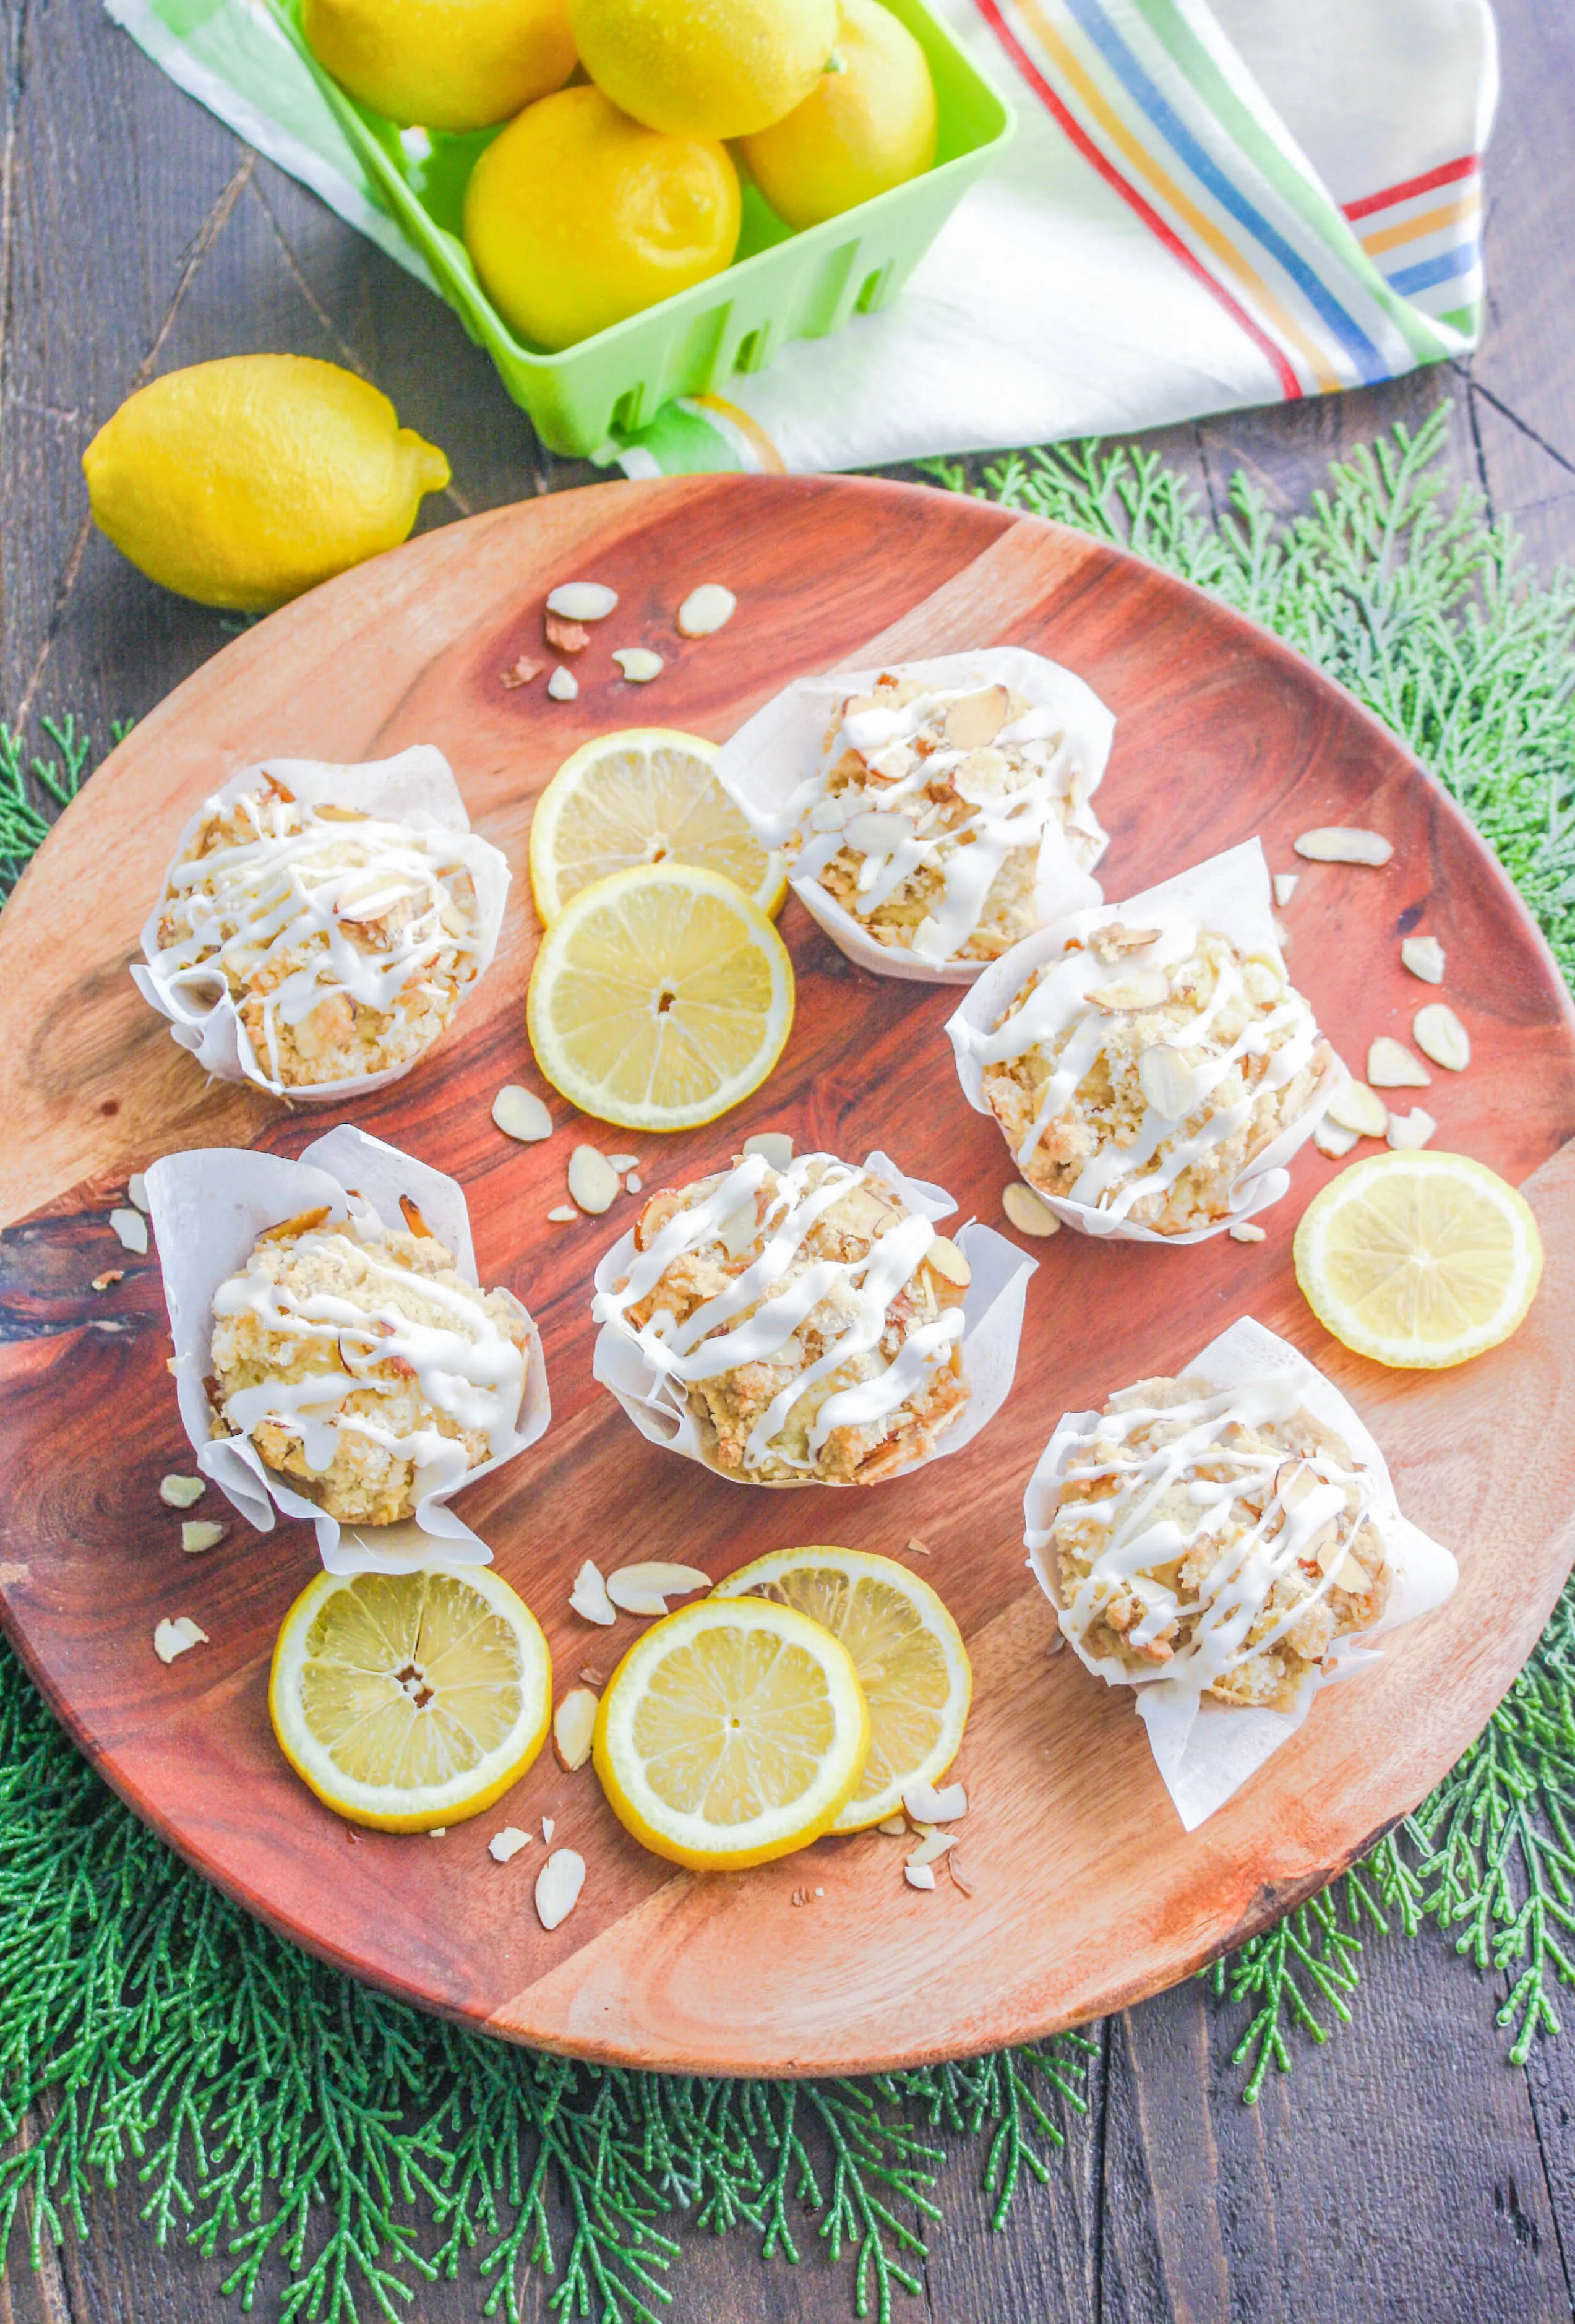 Lemon Muffins with Almond Streusel and Glaze are a treat in the a.m. You'll love lemon muffins any time of day or night!